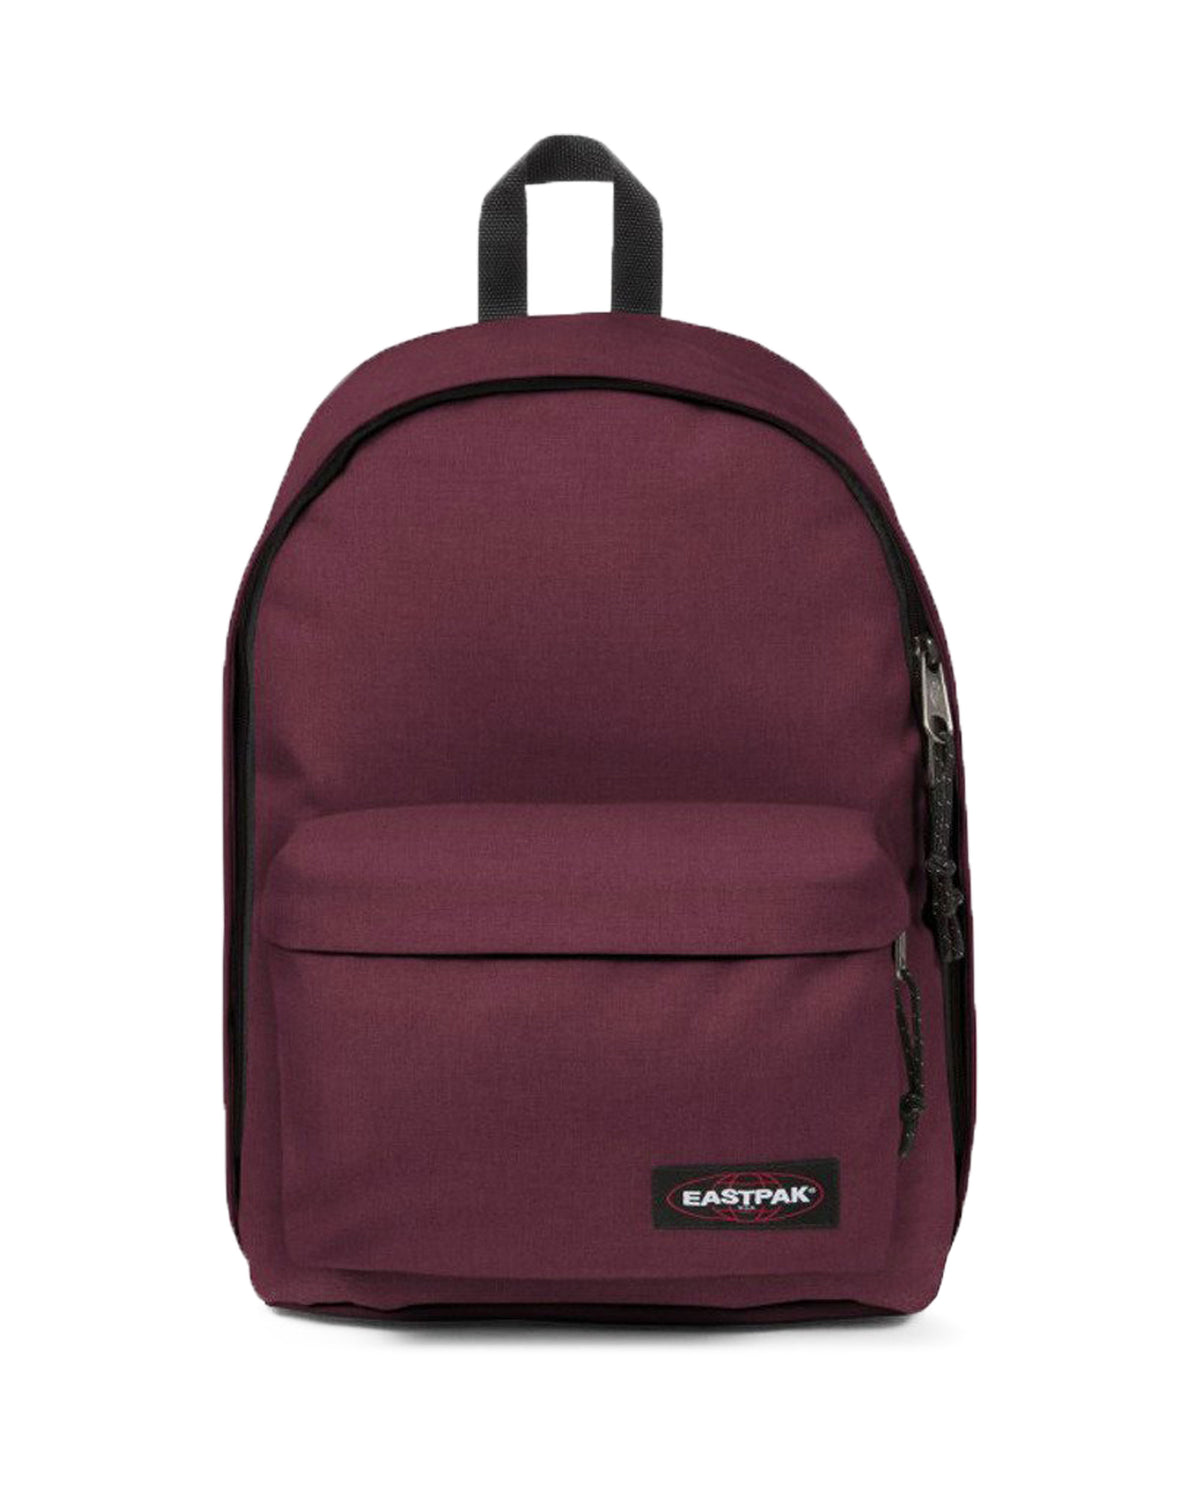 Backpack Eastpak out of office crafty wine